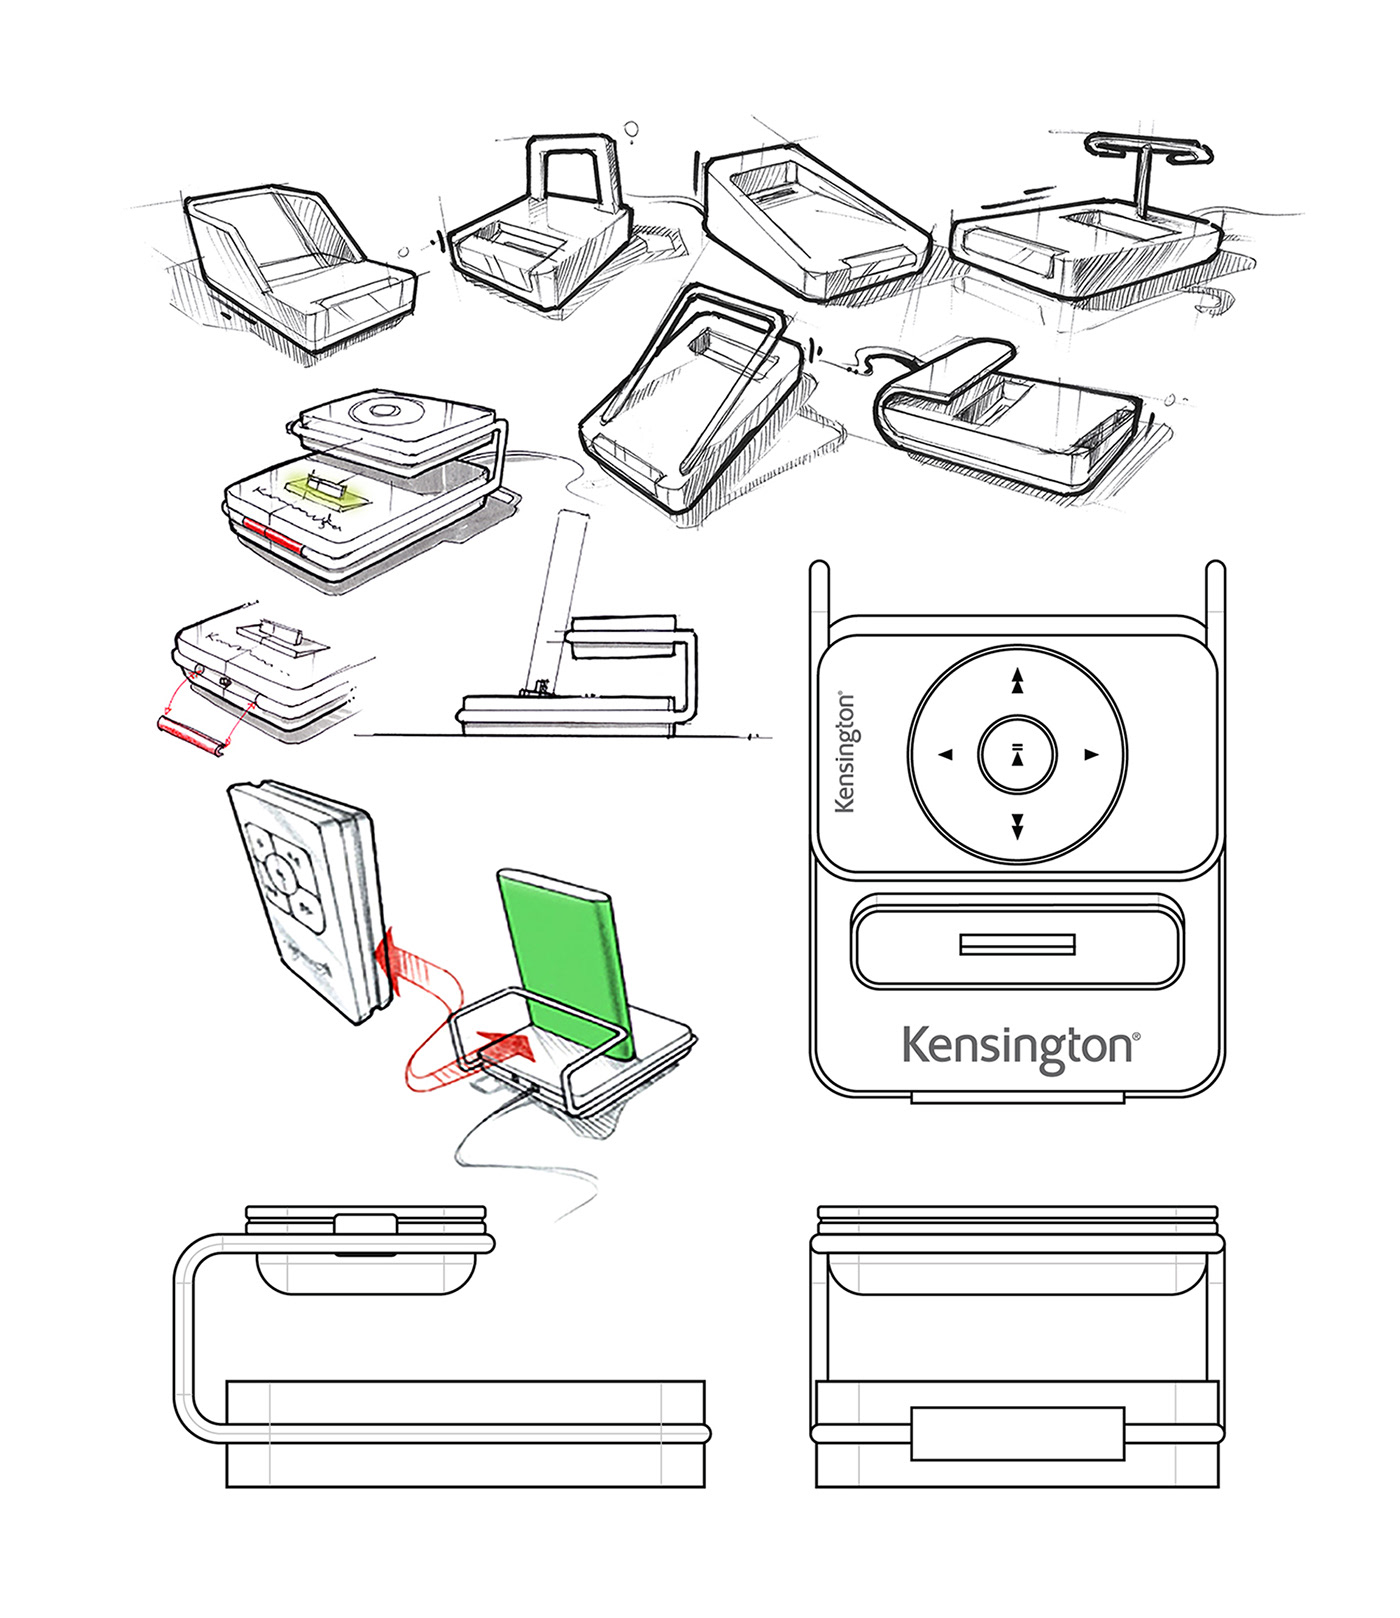 apple cmf electronic devices Handheld Devices industrial design  ipod kensington product design  Design Concepts sketching